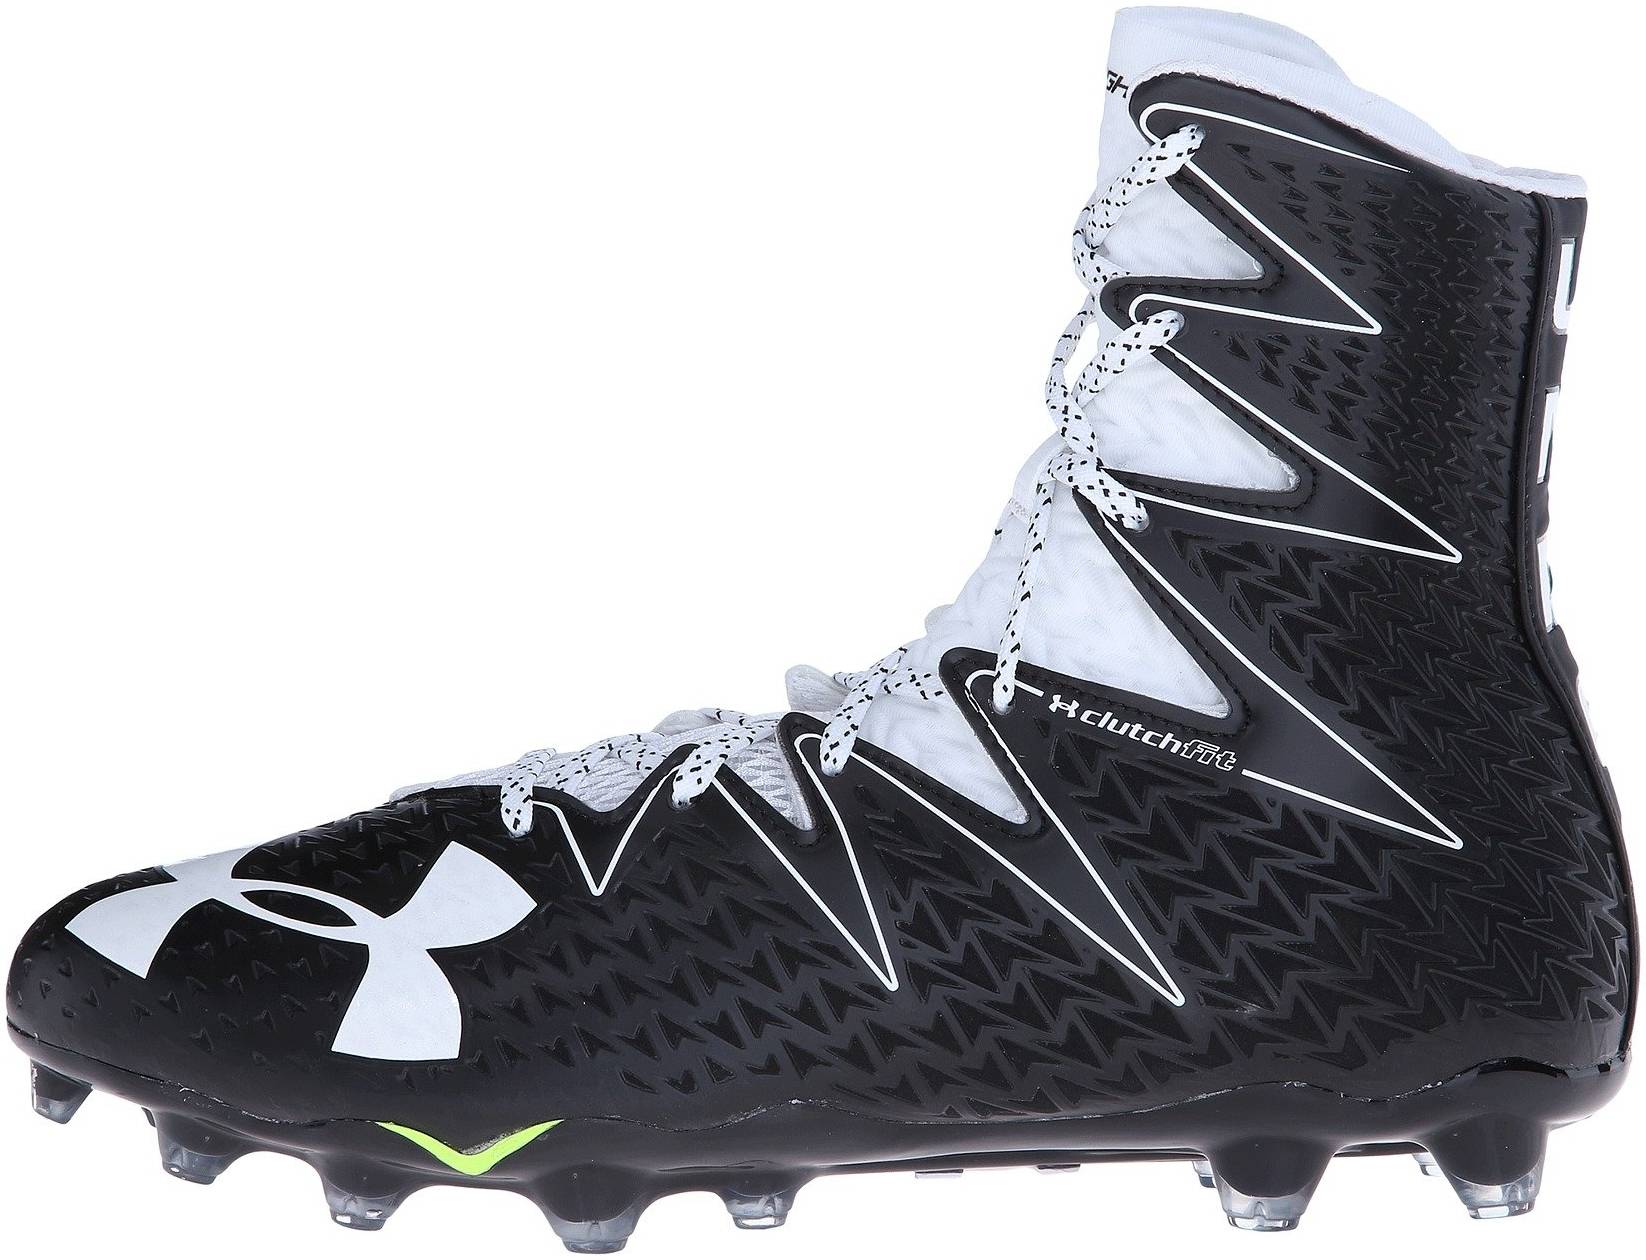 Under Armour Men's UA Highlight Football Cleats Black White 8 9 MSRP $130 NEW 